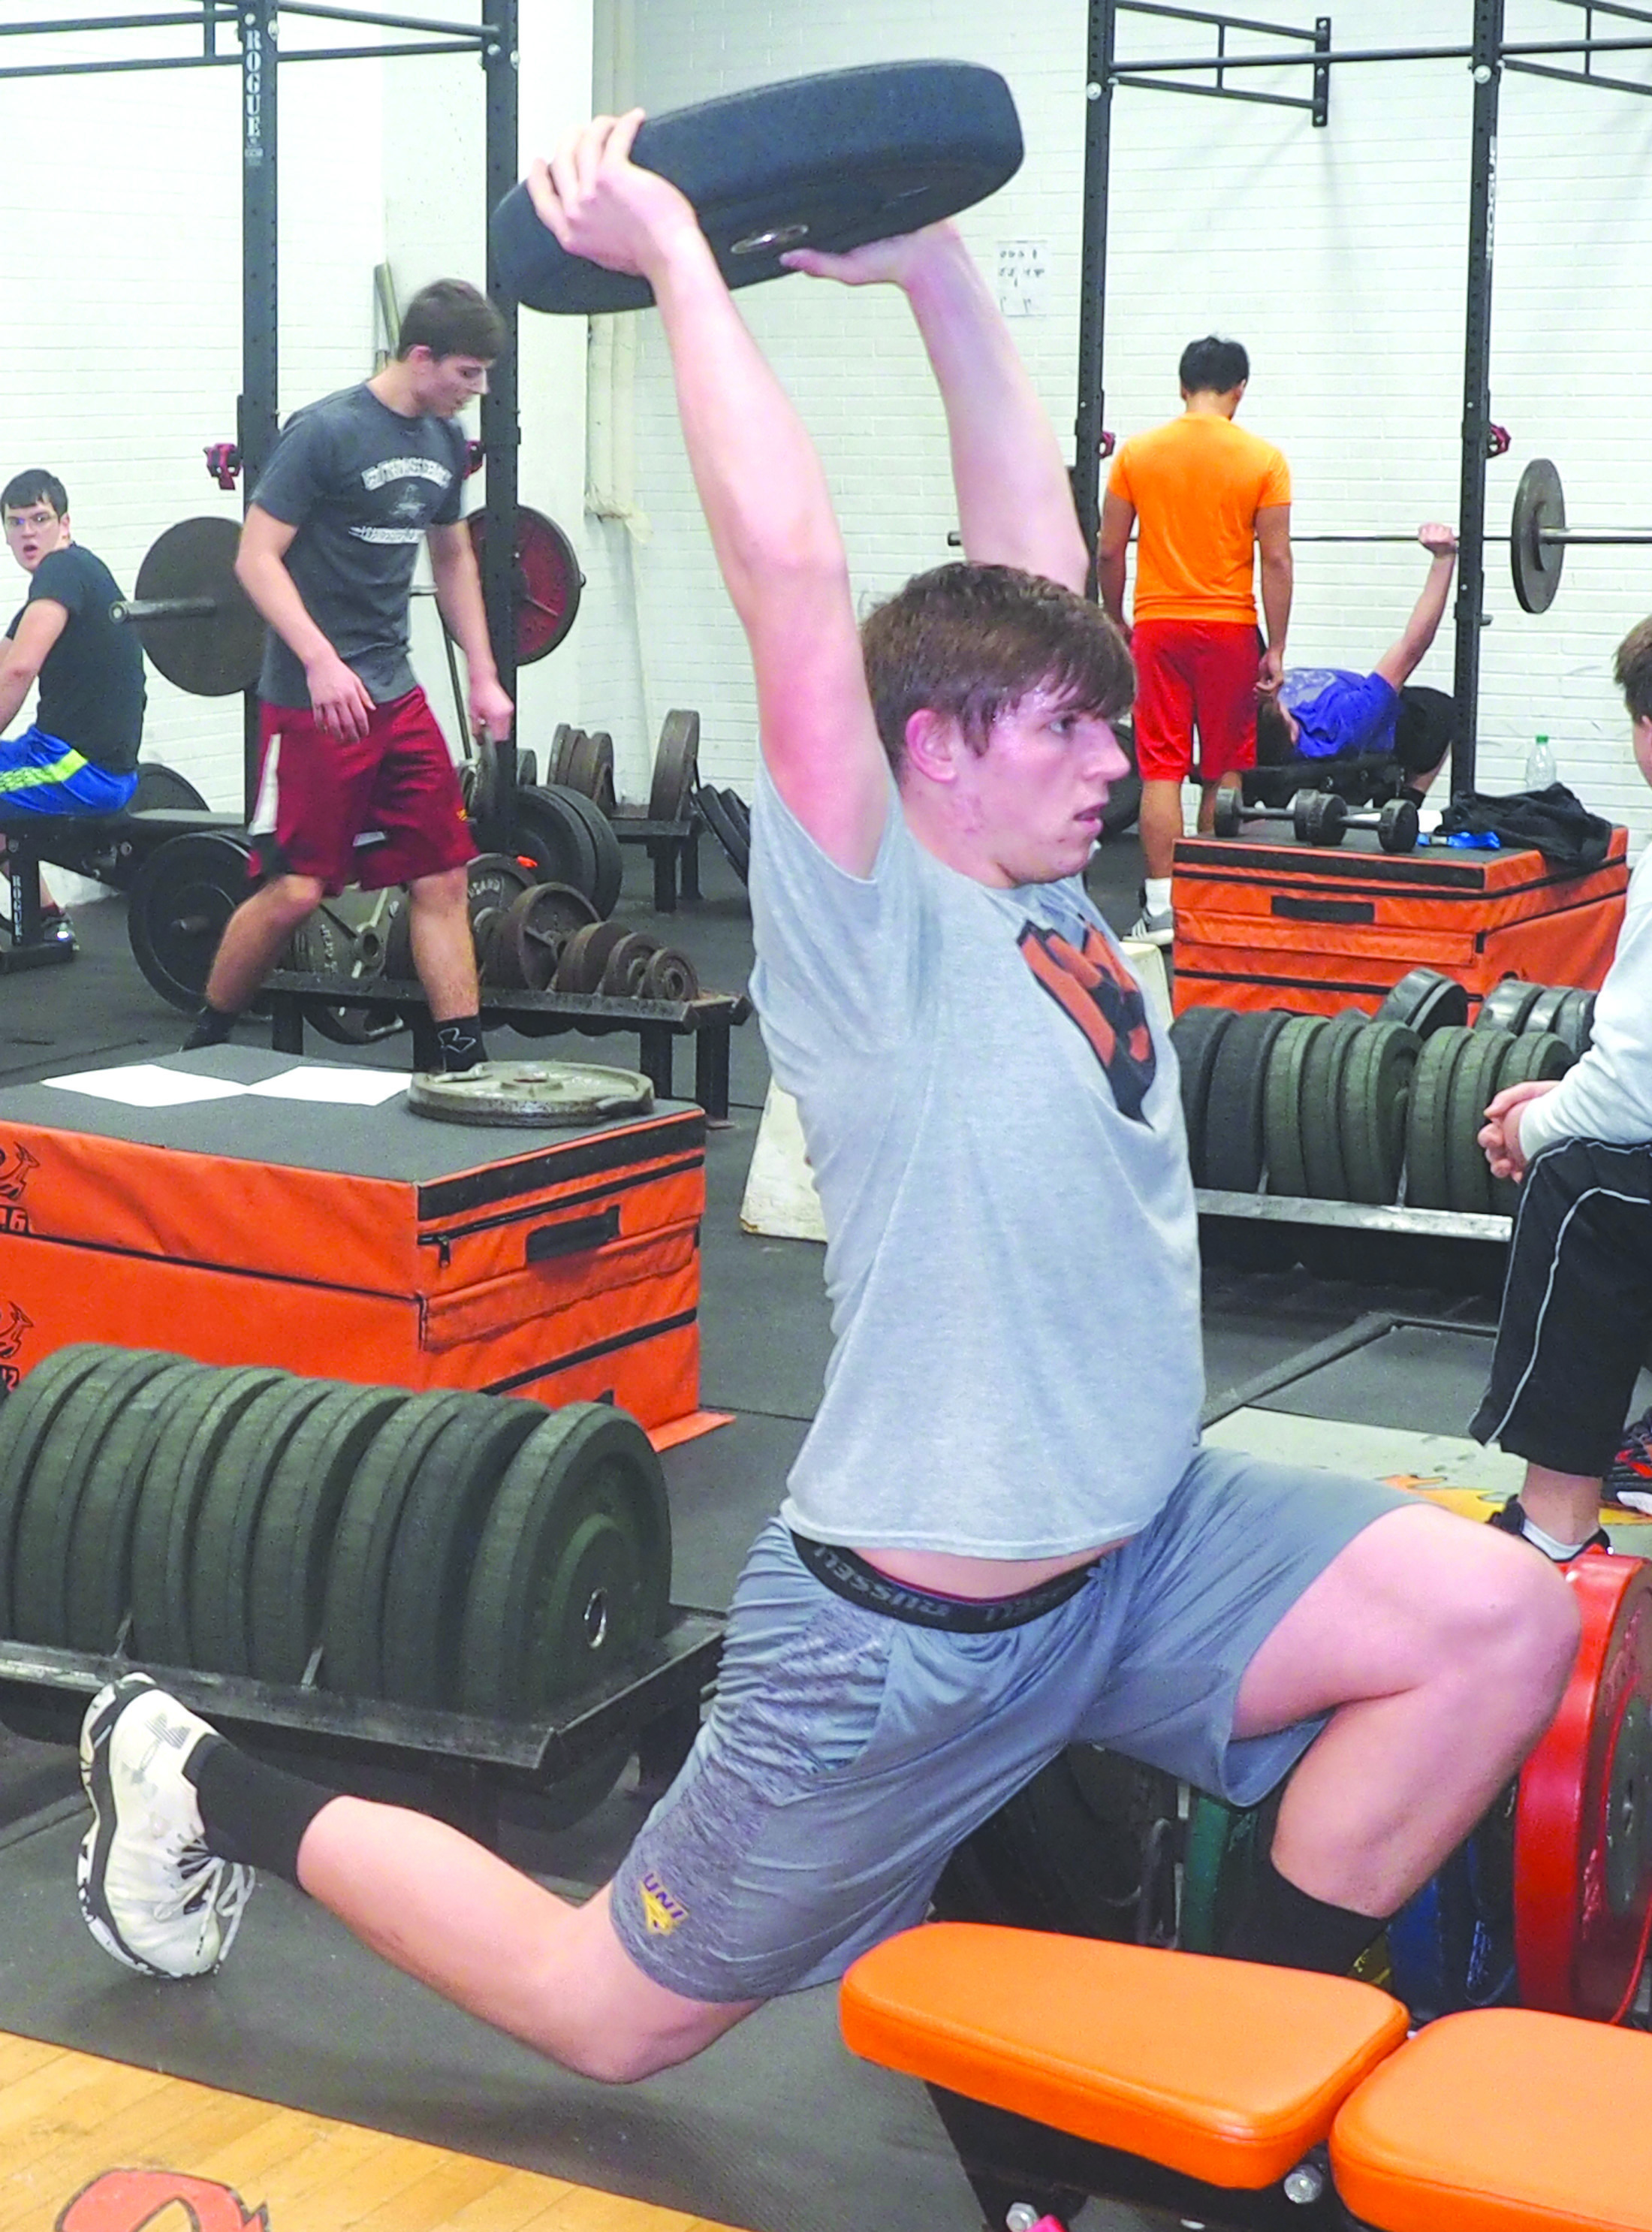 With gyms no longer an option, Comet coach offers at-home training tips